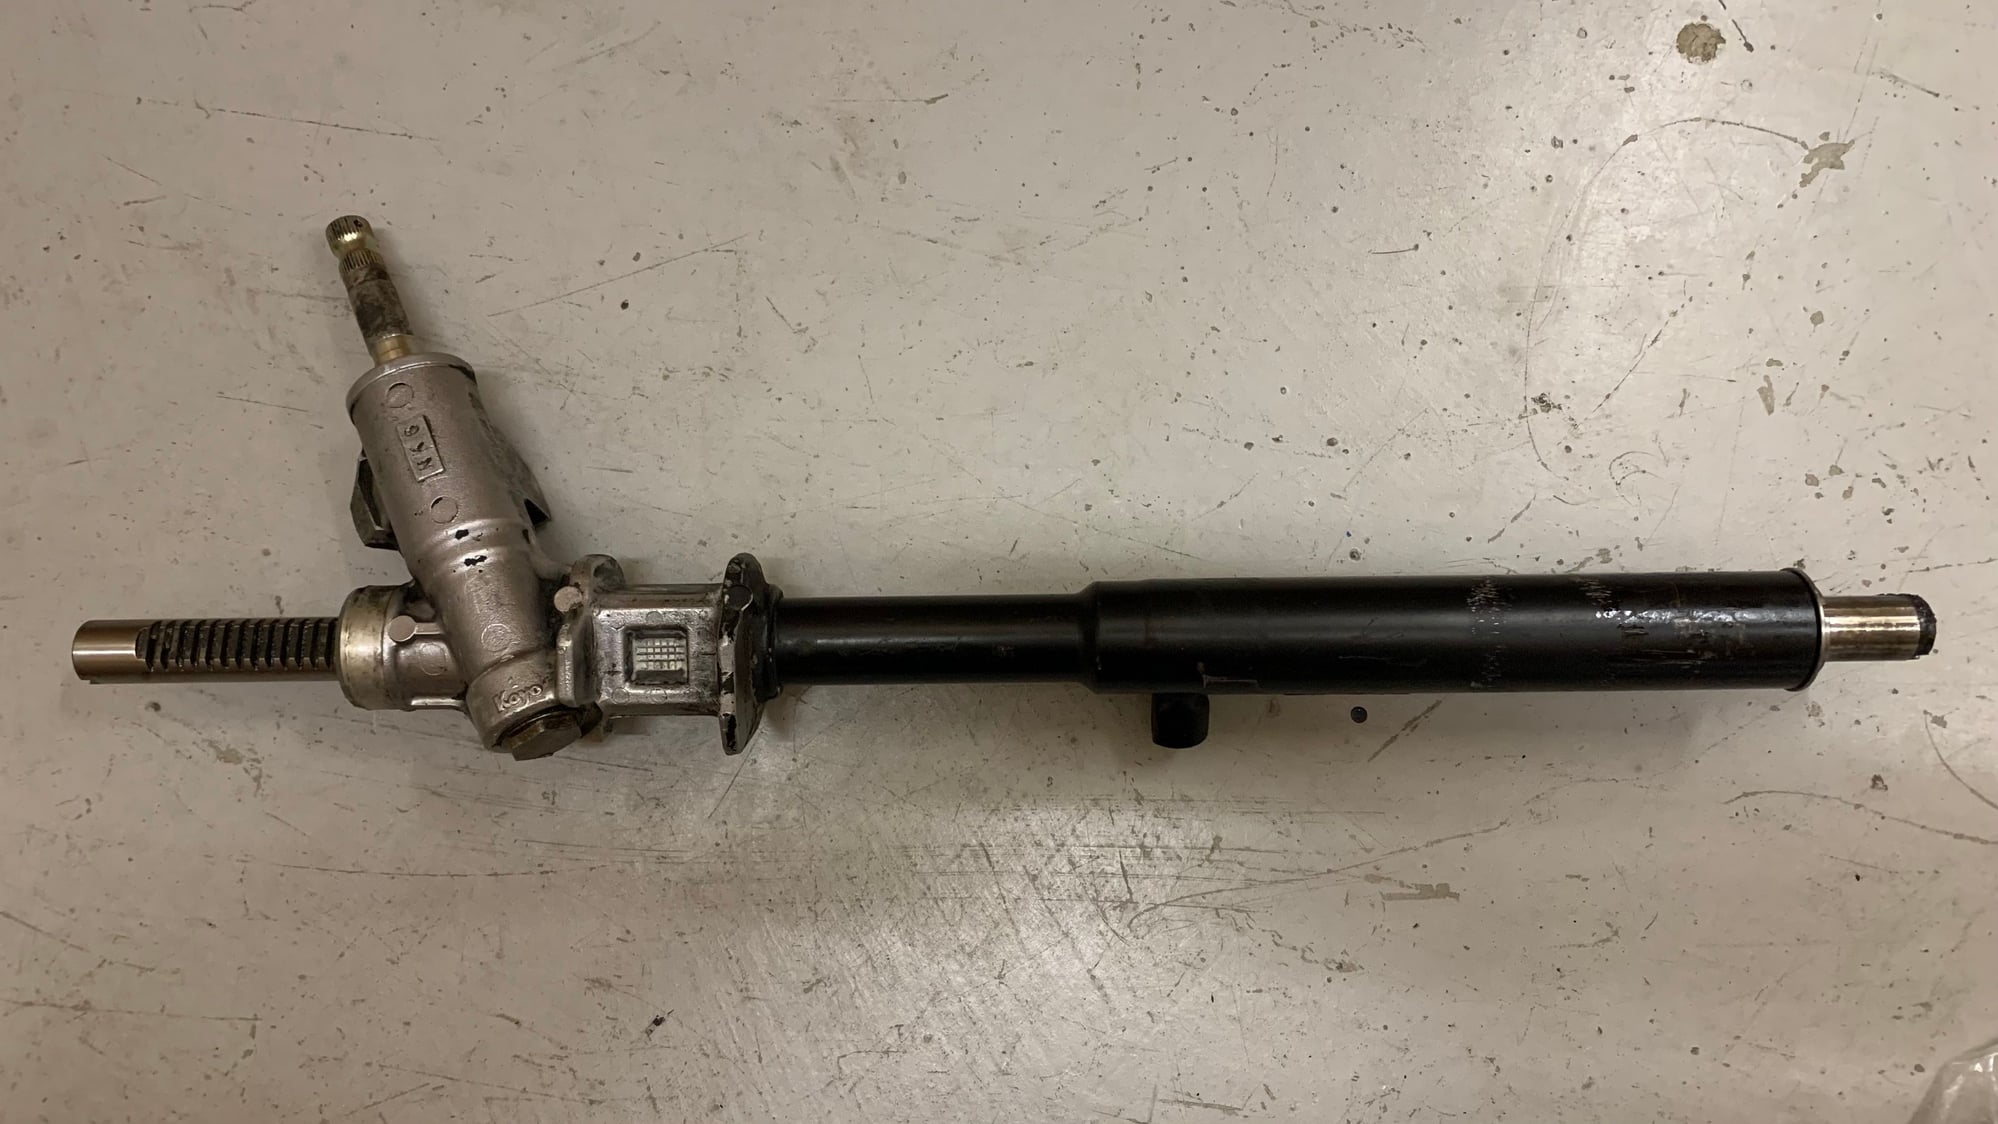 Steering/Suspension - FD LHD Power Steering rack - Used - 1992 to 1999 Mazda RX-7 - Vancouver, BC V5T 3N, Canada